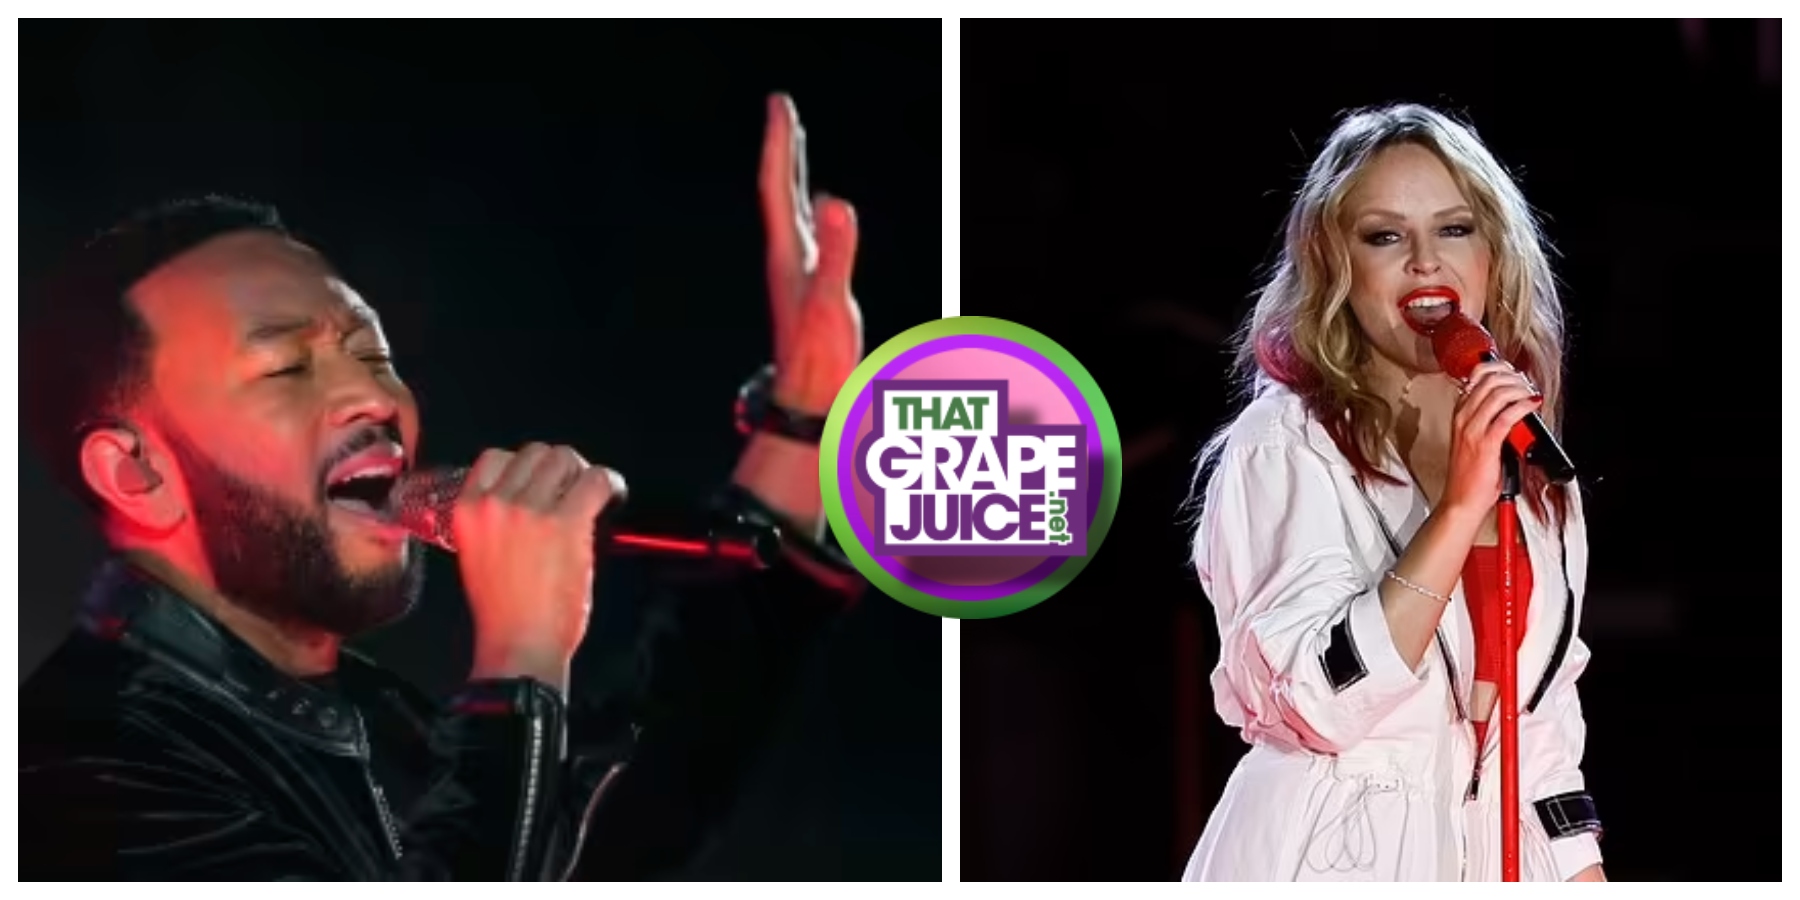 Did You Miss It? Kylie Minogue & John Legend Rocked the 2023 F1 Vegas Grand Prix’s Opening Ceremony with ‘Padam’ & ‘All of Me’